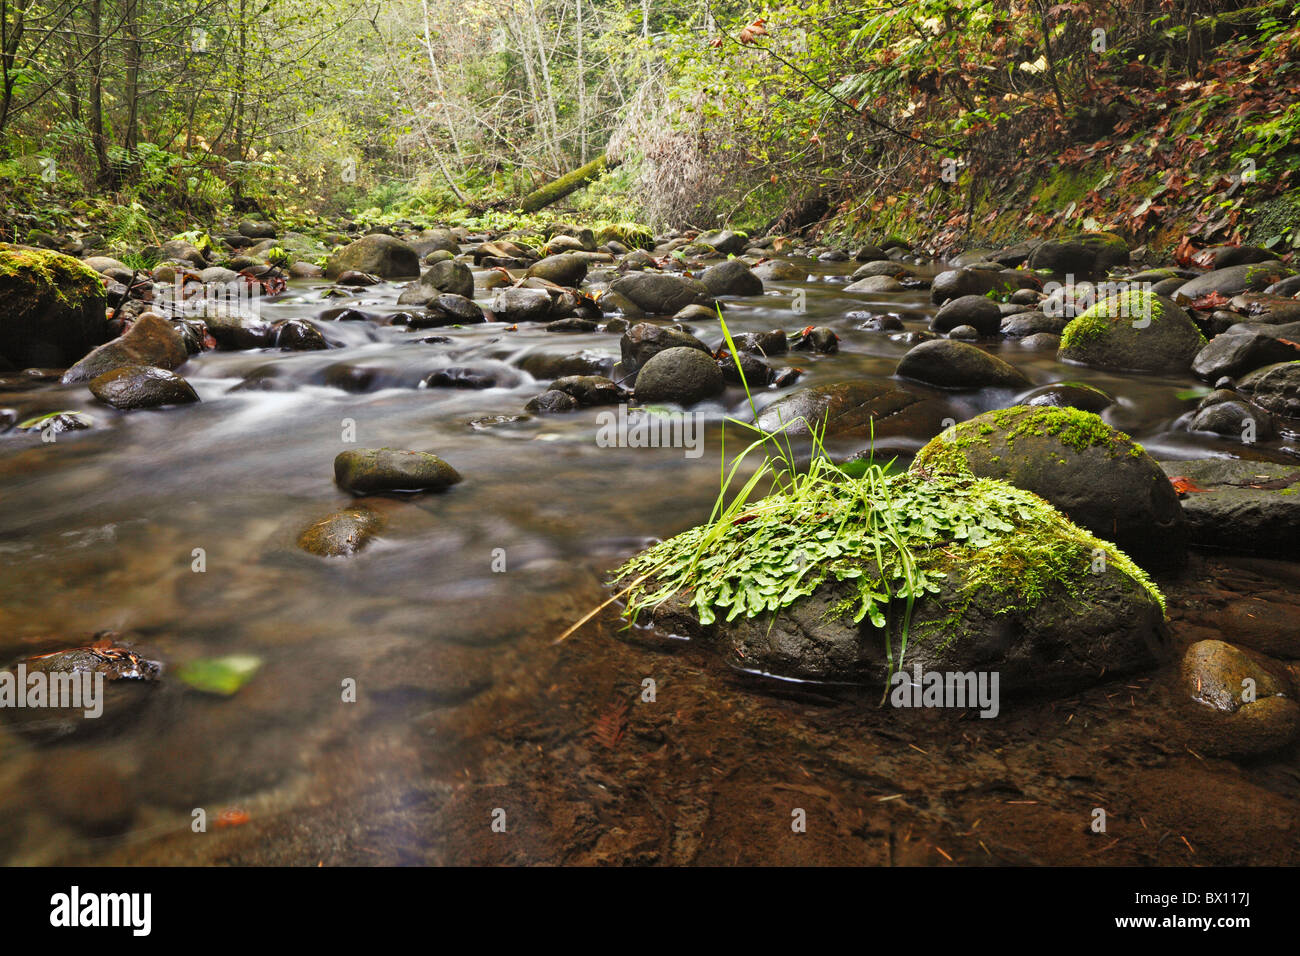 River rocks in forest stream Stock Photo